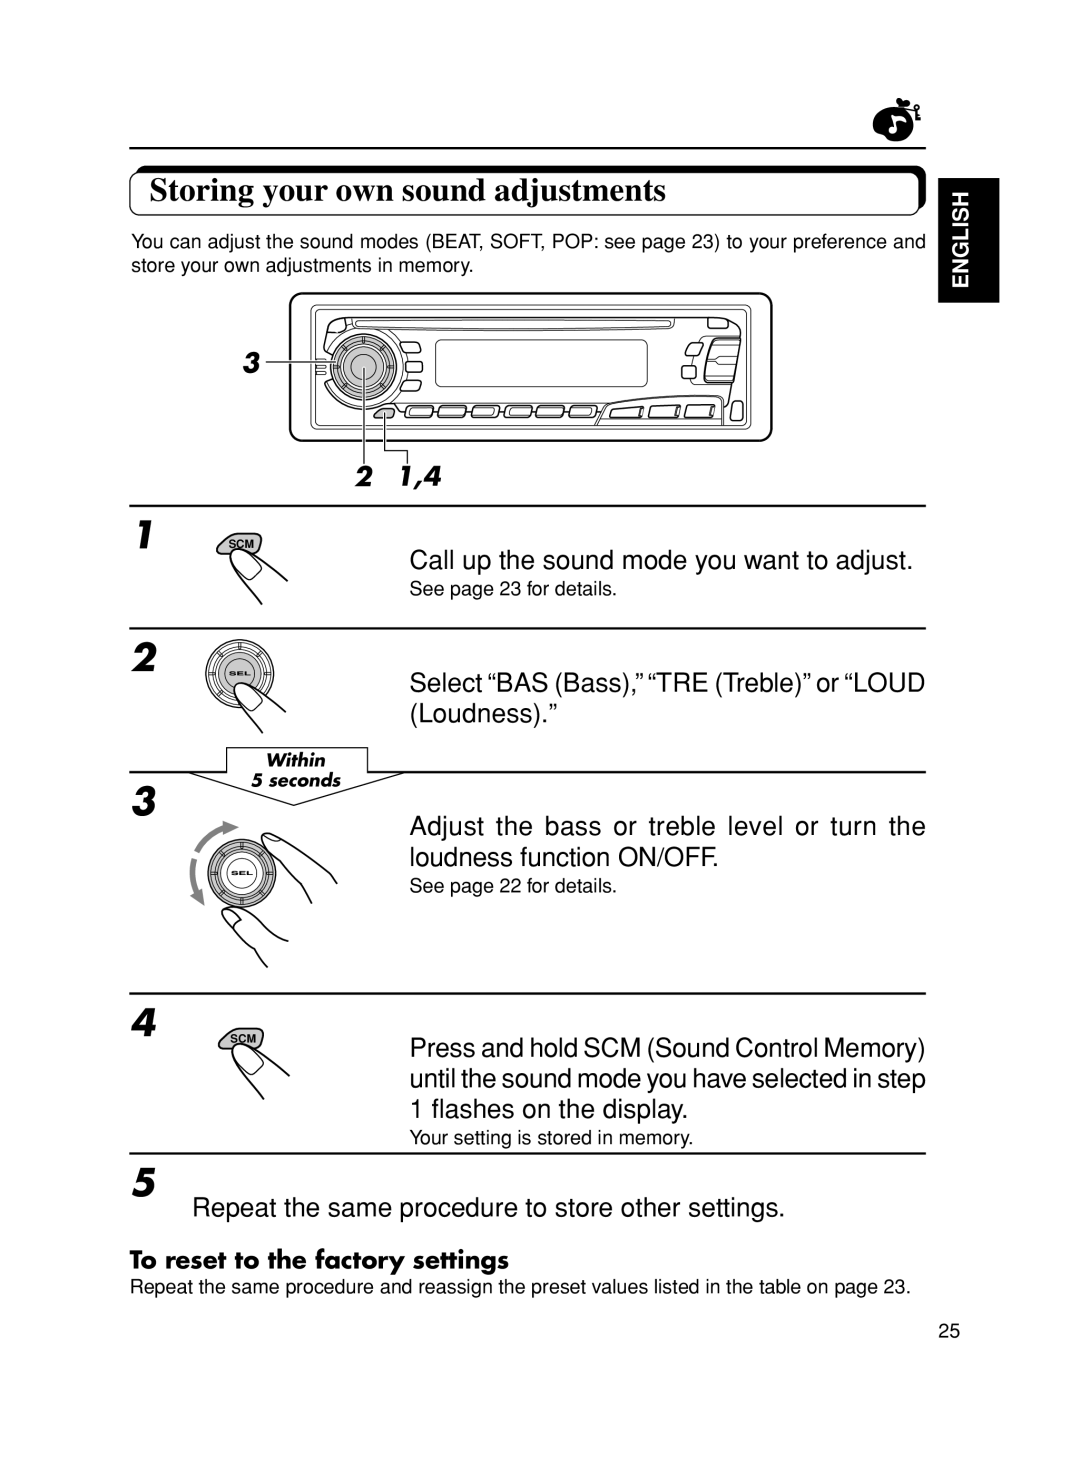 JVC KD-S8R manual Storing your own sound adjustments, 3 2 1,4 